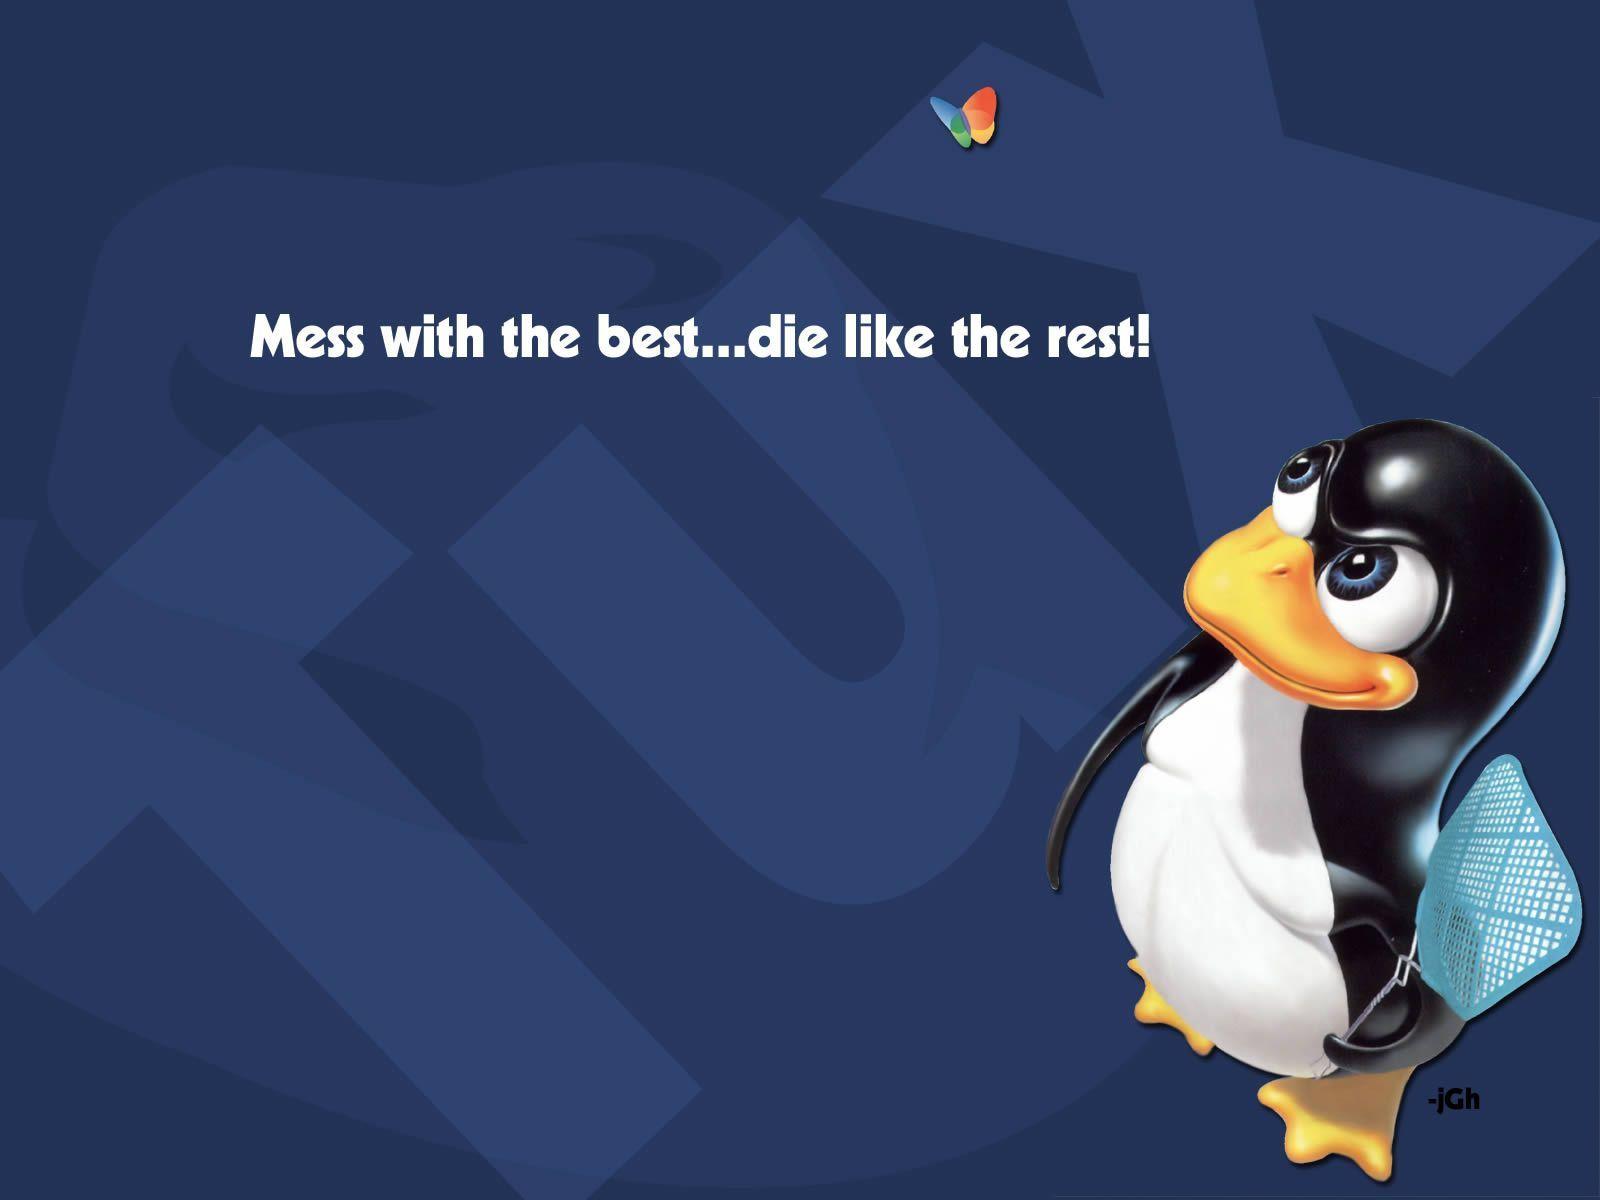 Download 45 Awesome Linux Wallpaper